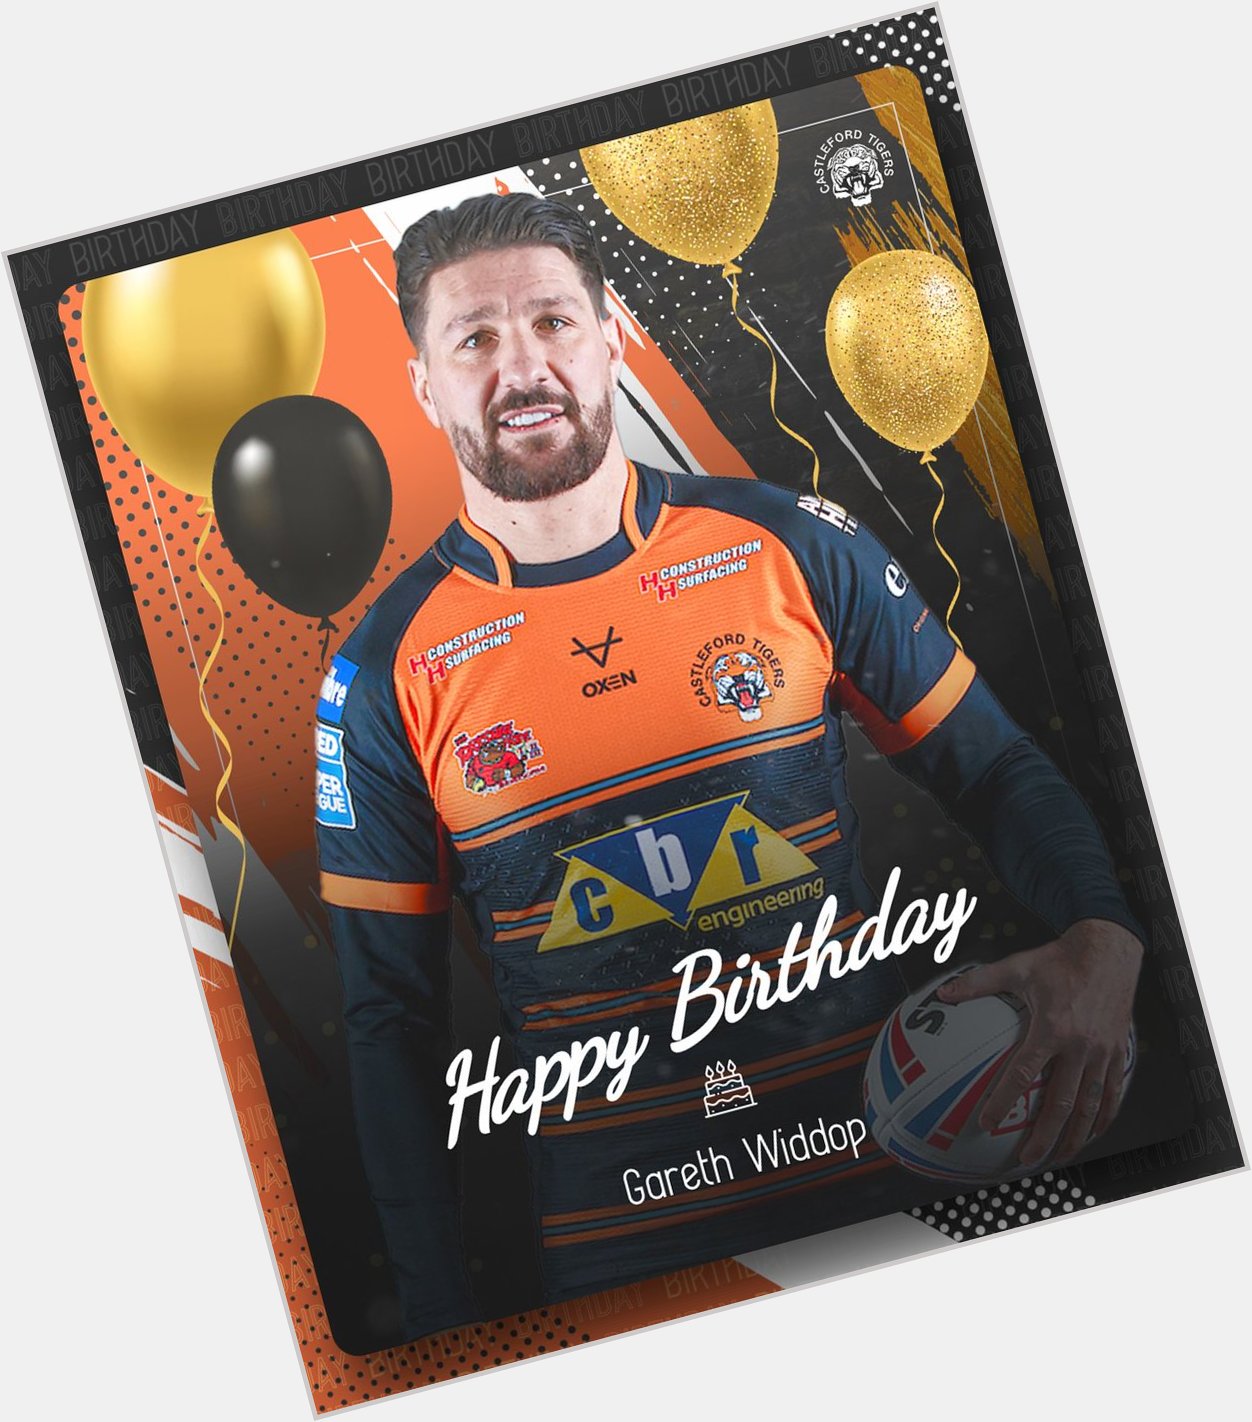  Happy Birthday to Tigers half-back Gareth Widdop! From everyone at the Club, have a great day Gaz! 